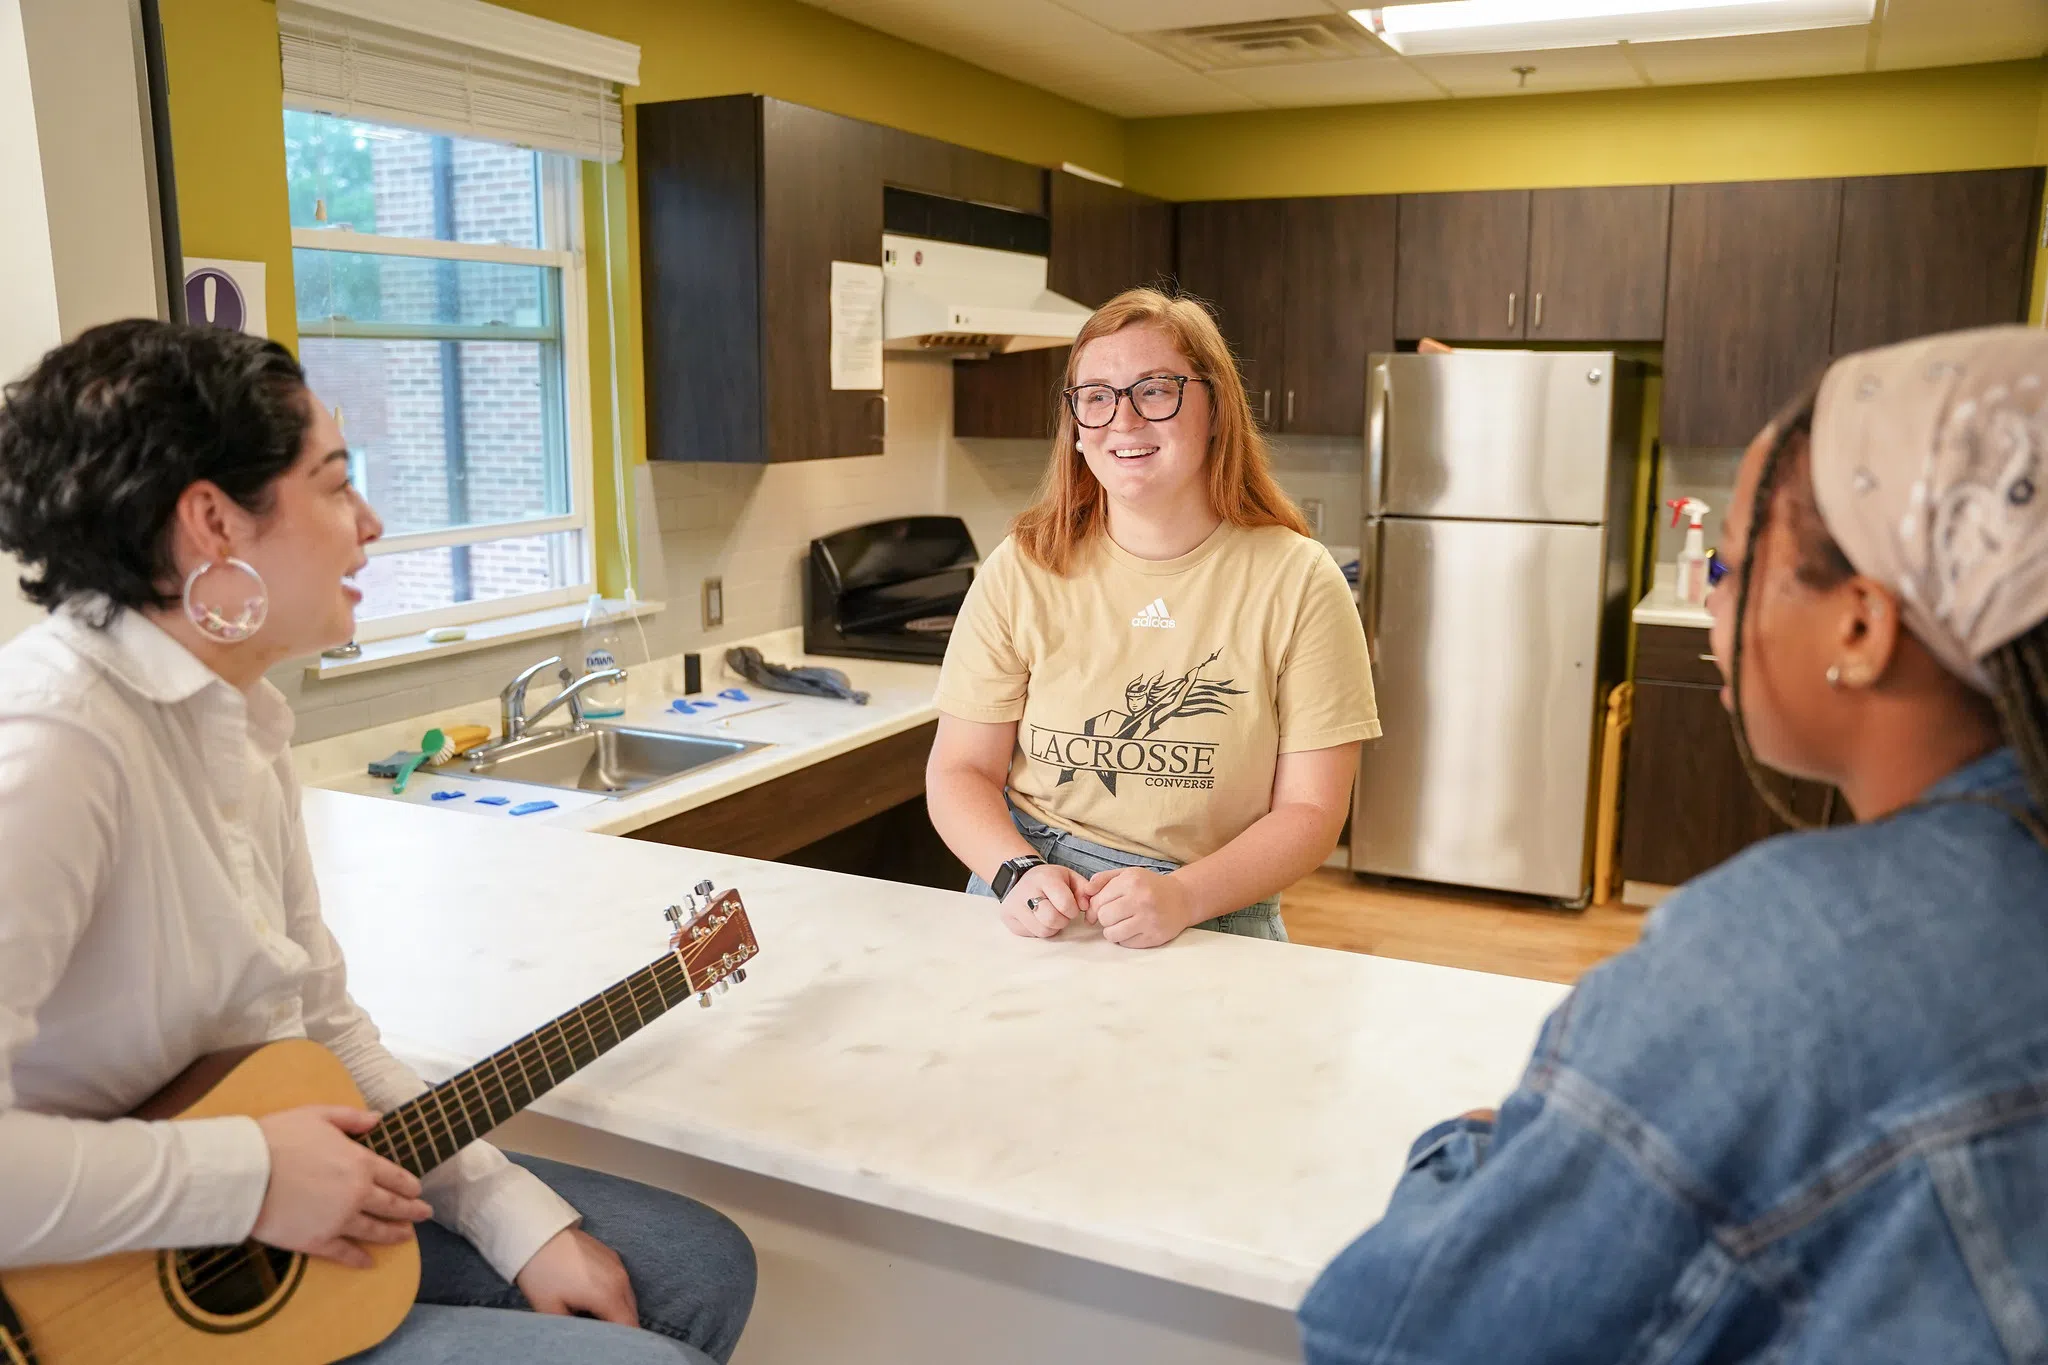 A woman in a yellow t-shirt stands on one side of a kitchen counter speaking with two other women, one holding a guitar, on the other side of the counter. A stovetop and refrigerator can be seen in the background.